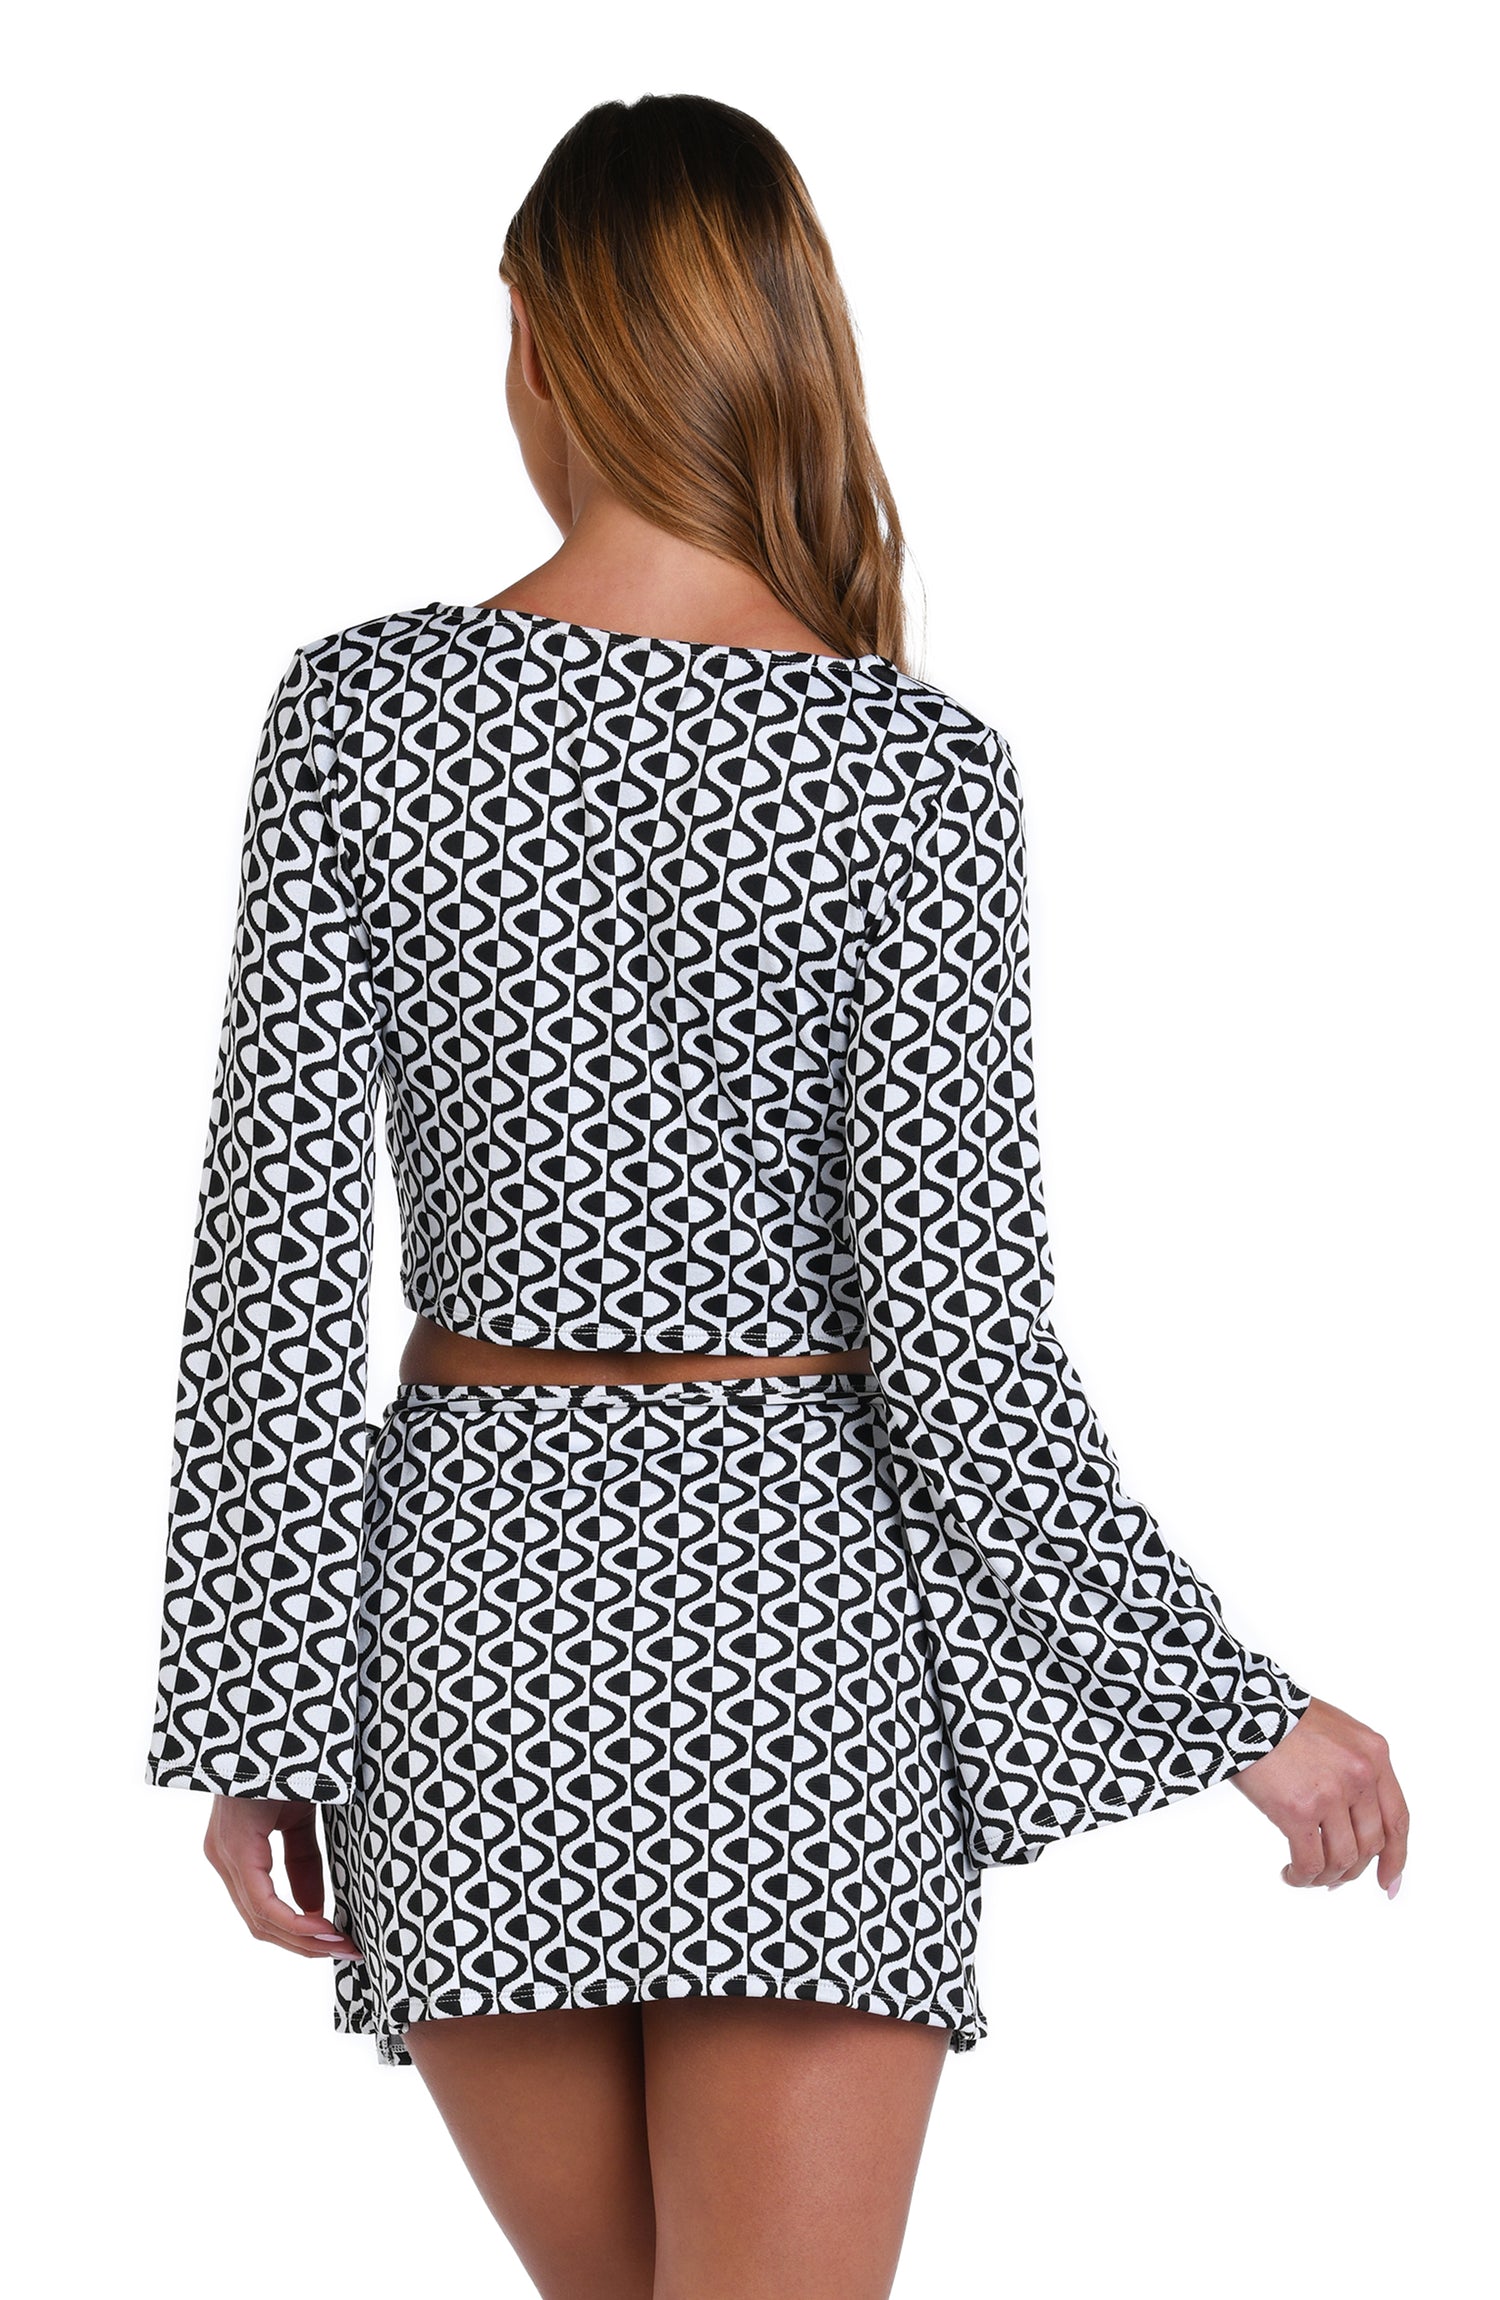 Model is wearing a black and white geometric patterned Crop Top Cover Up